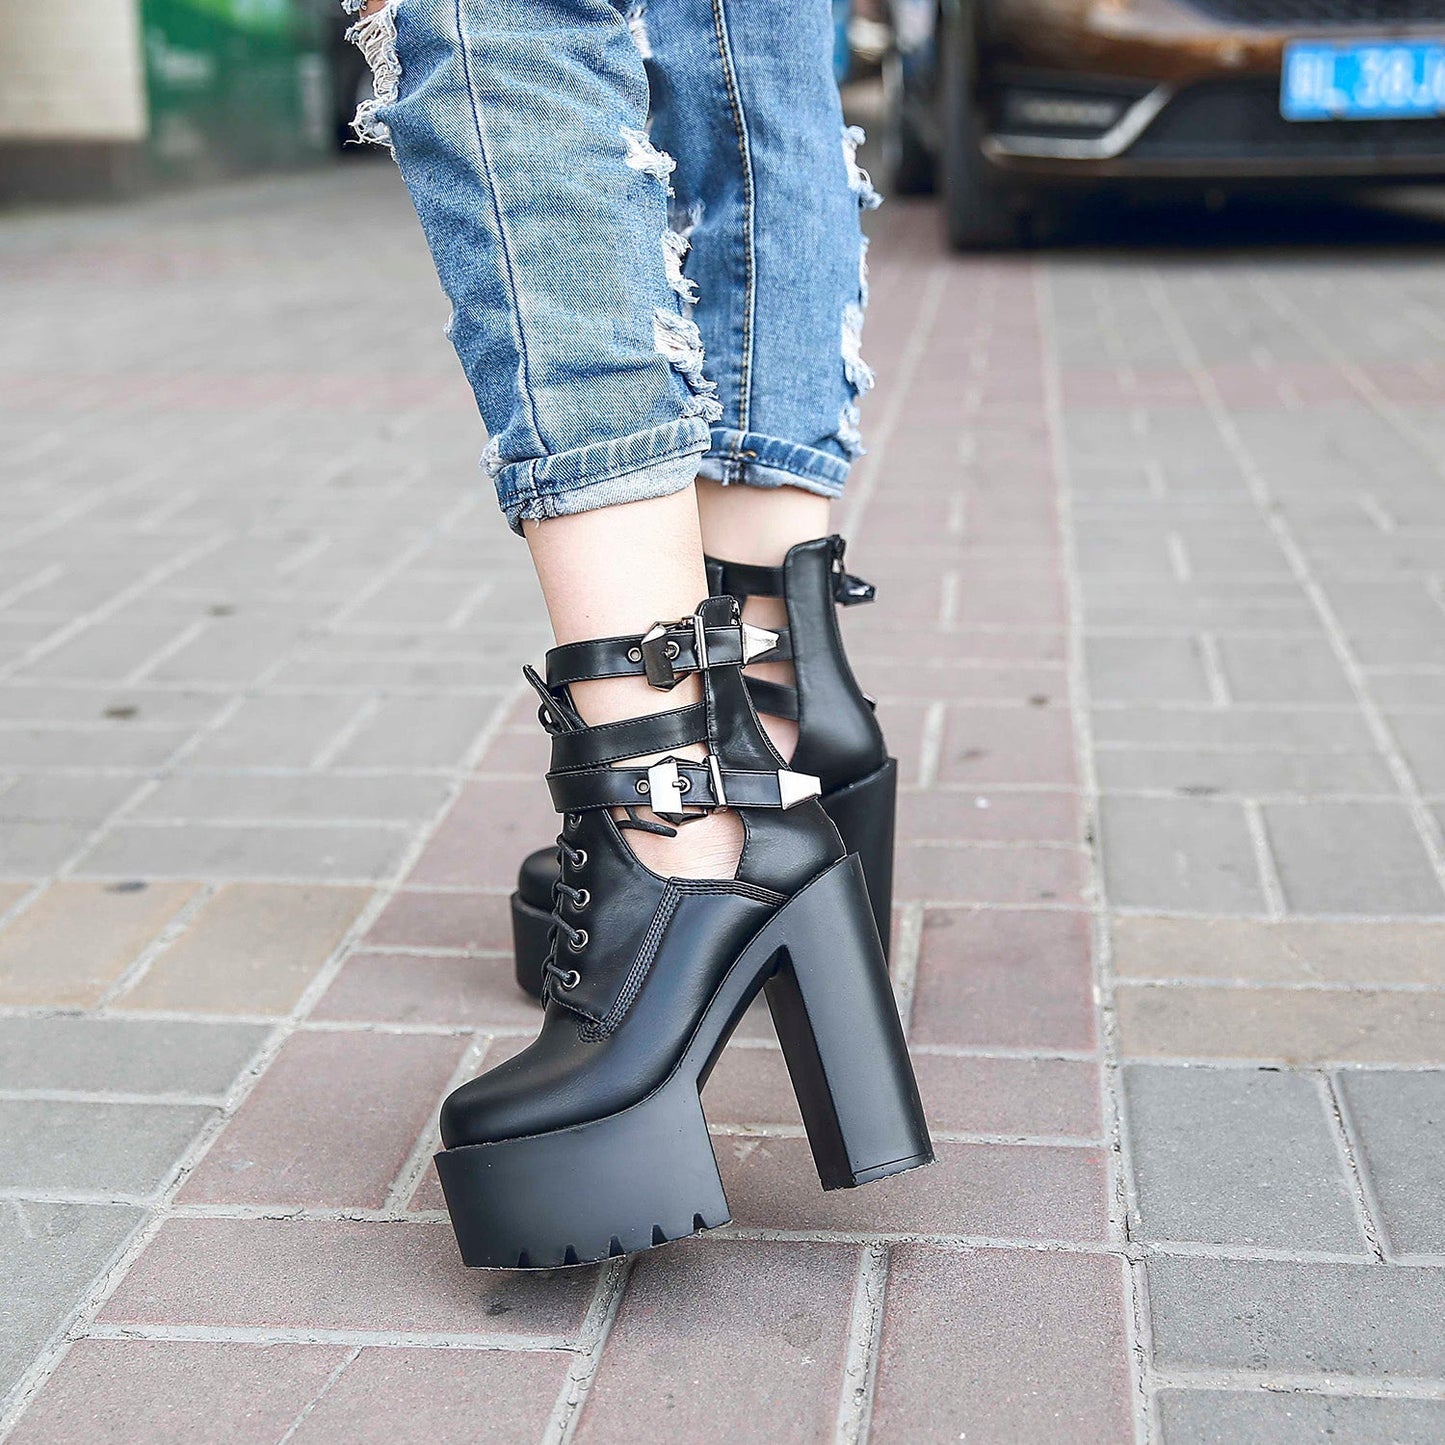 Genuine Leather High Heels Rock Style Boots / Alternative Thick Platform Boots